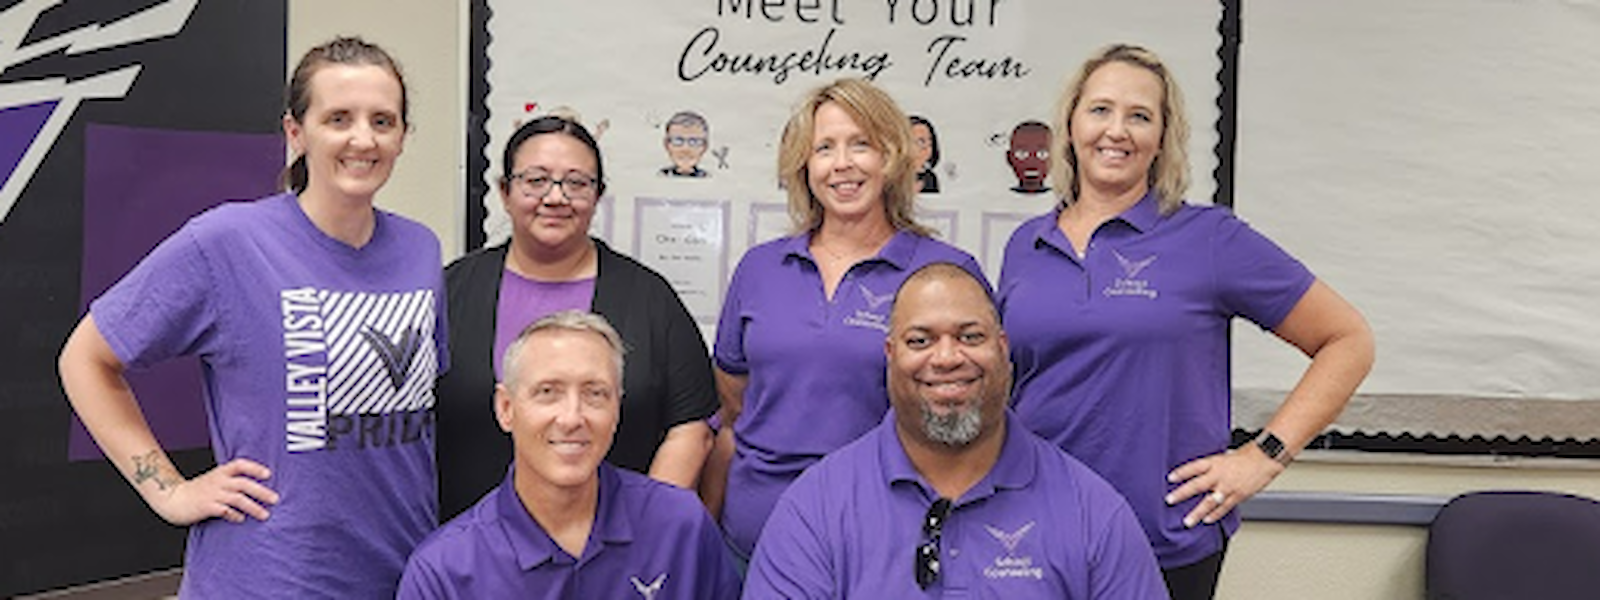 VVHS Counseling Team